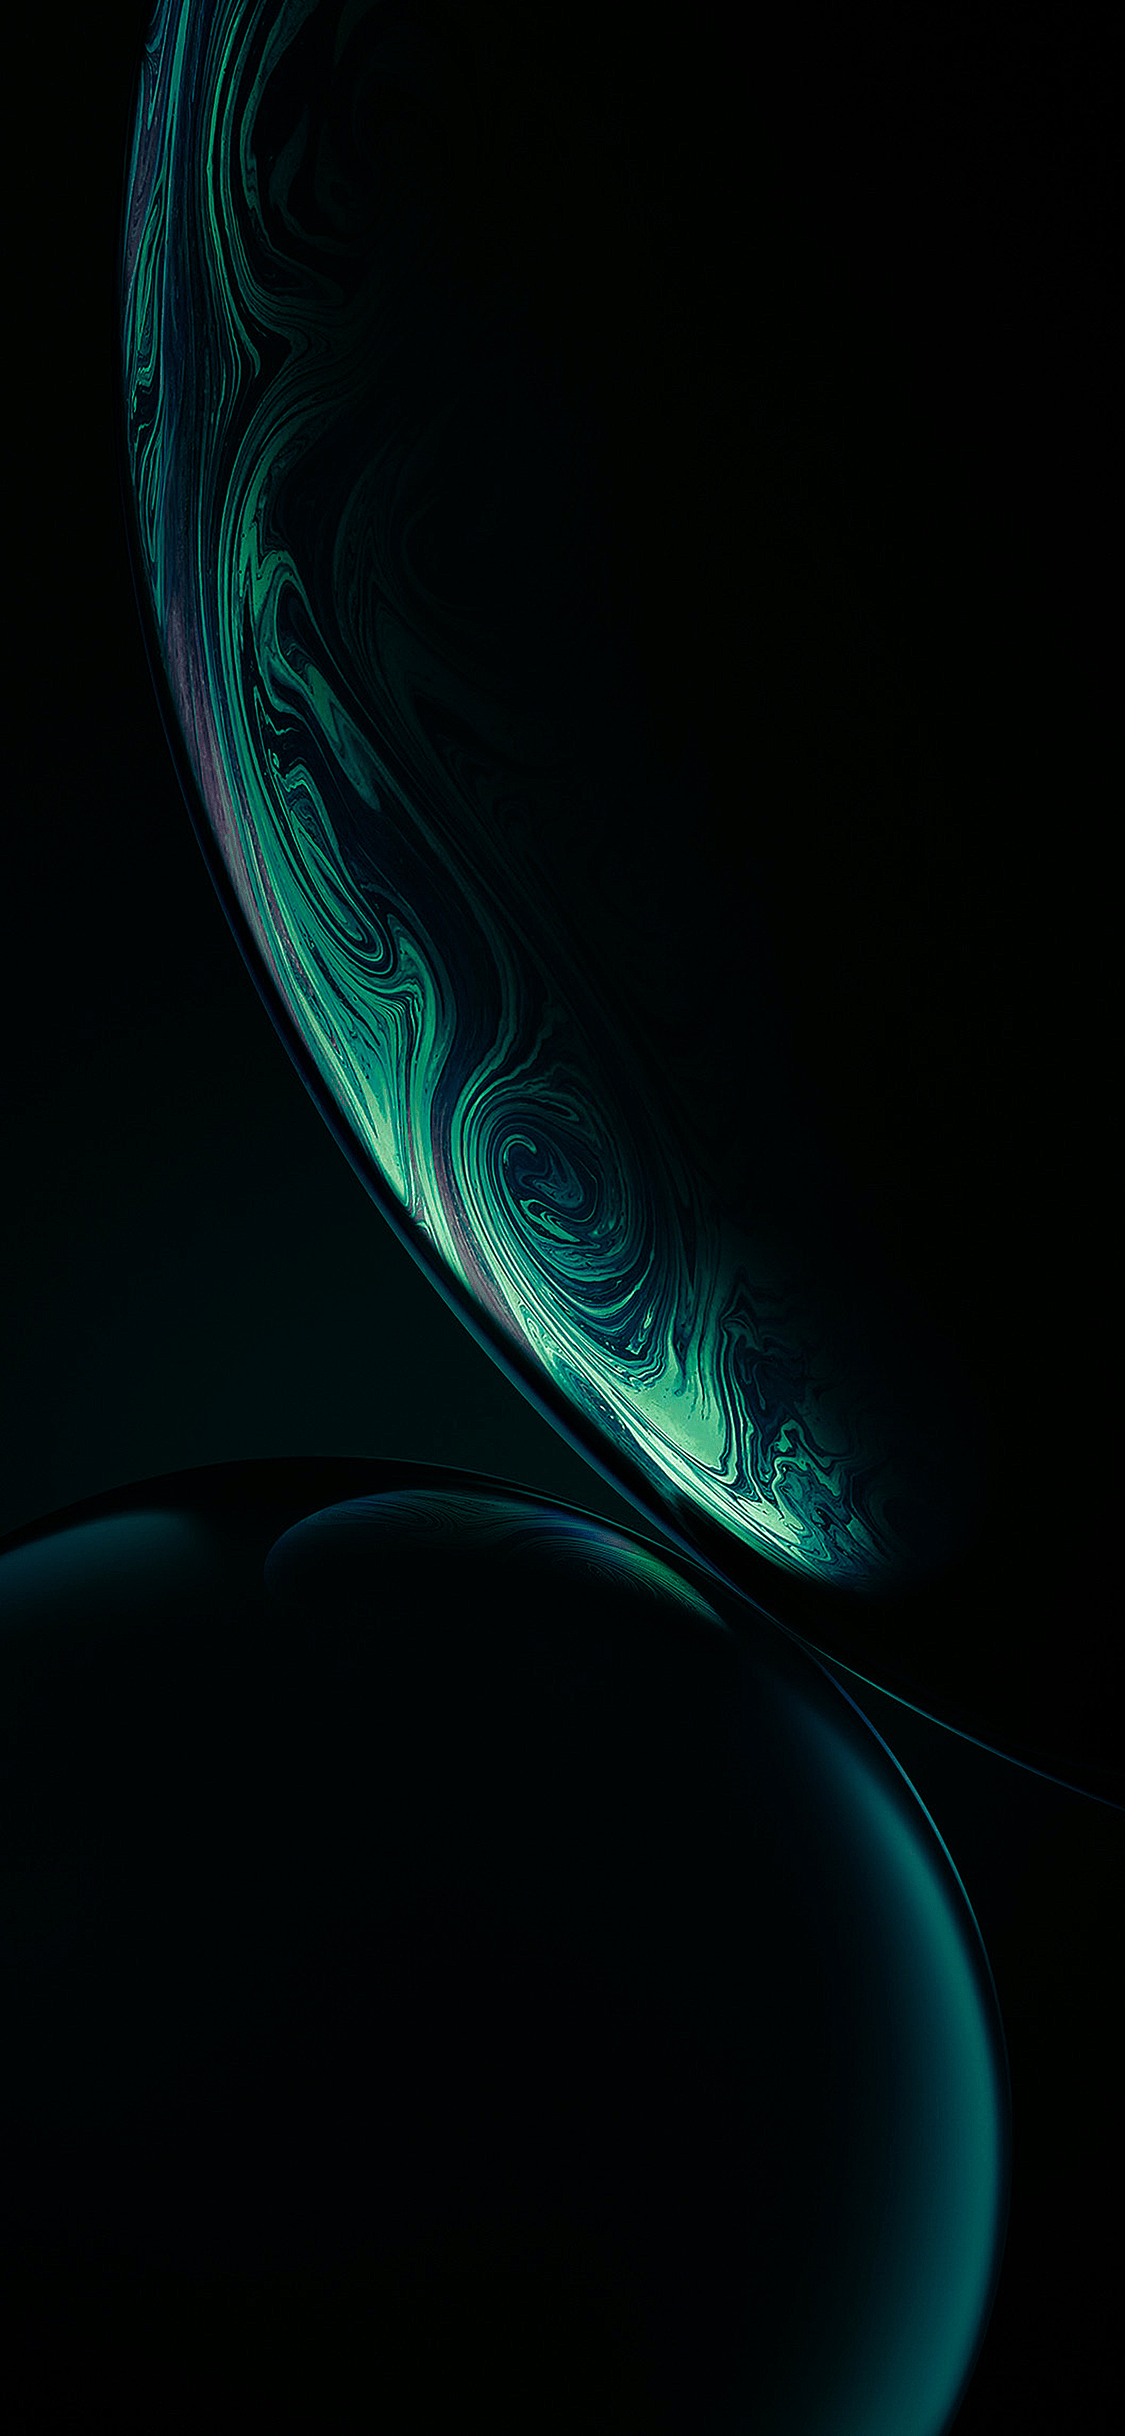 AR7 on Twitter wallpapers iPad Pro stock wallpaper Modd v3 Midnight  Green for  iPhone11ProMax  iPhone11Pro  iPhone11  iPhoneXSMAX   iPhoneXR  iPhoneXS  iPhoneX  ALL other iPhone  